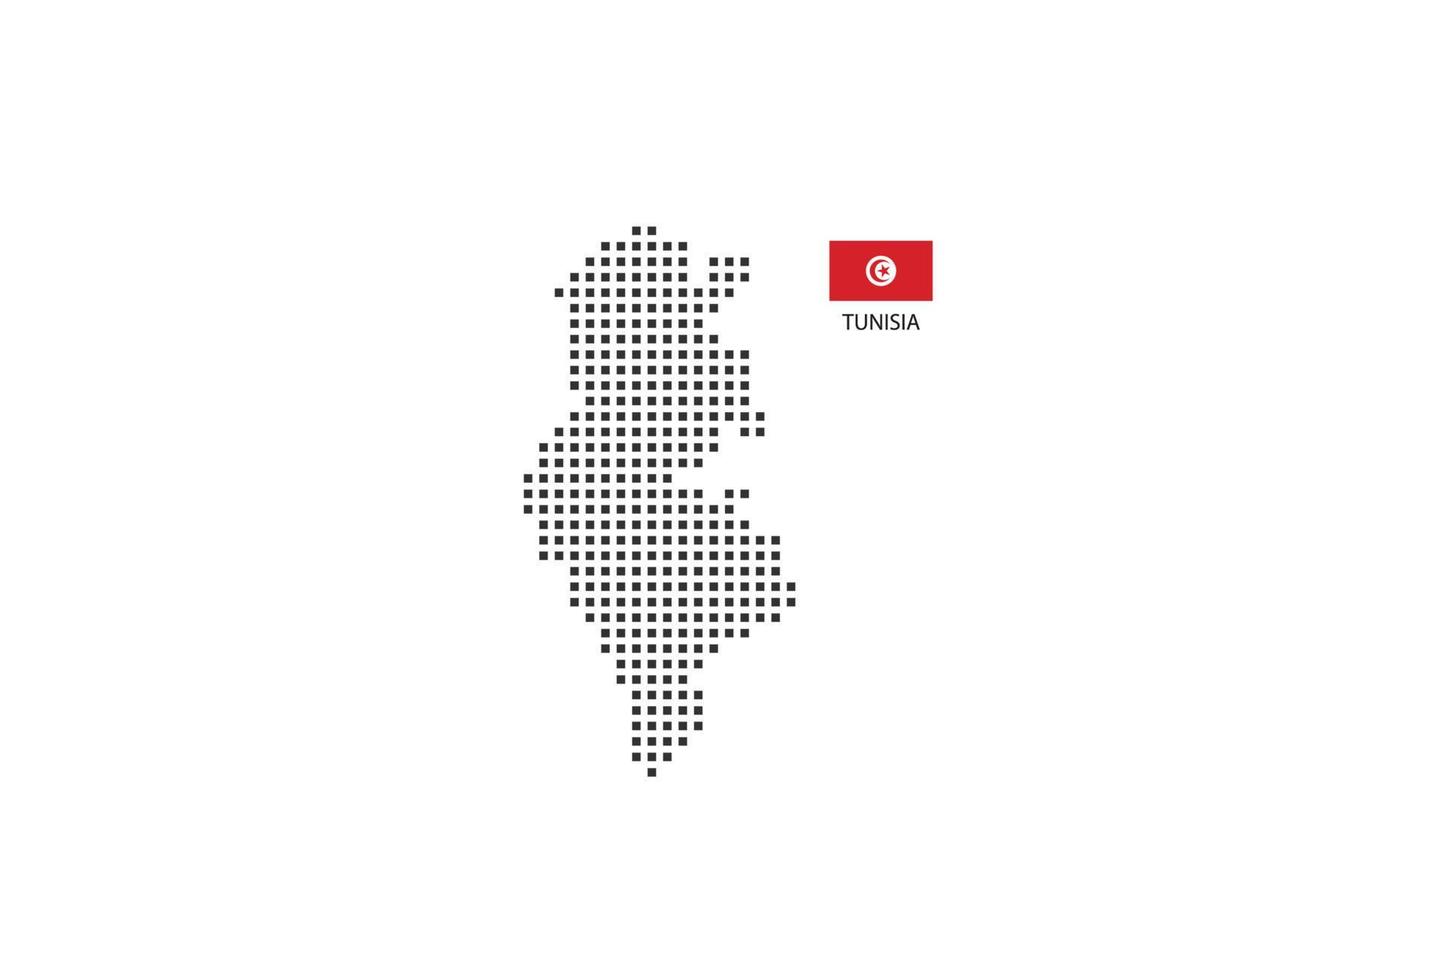 Vector square pixel dotted map of Tunisia isolated on white background with Tunisia flag.